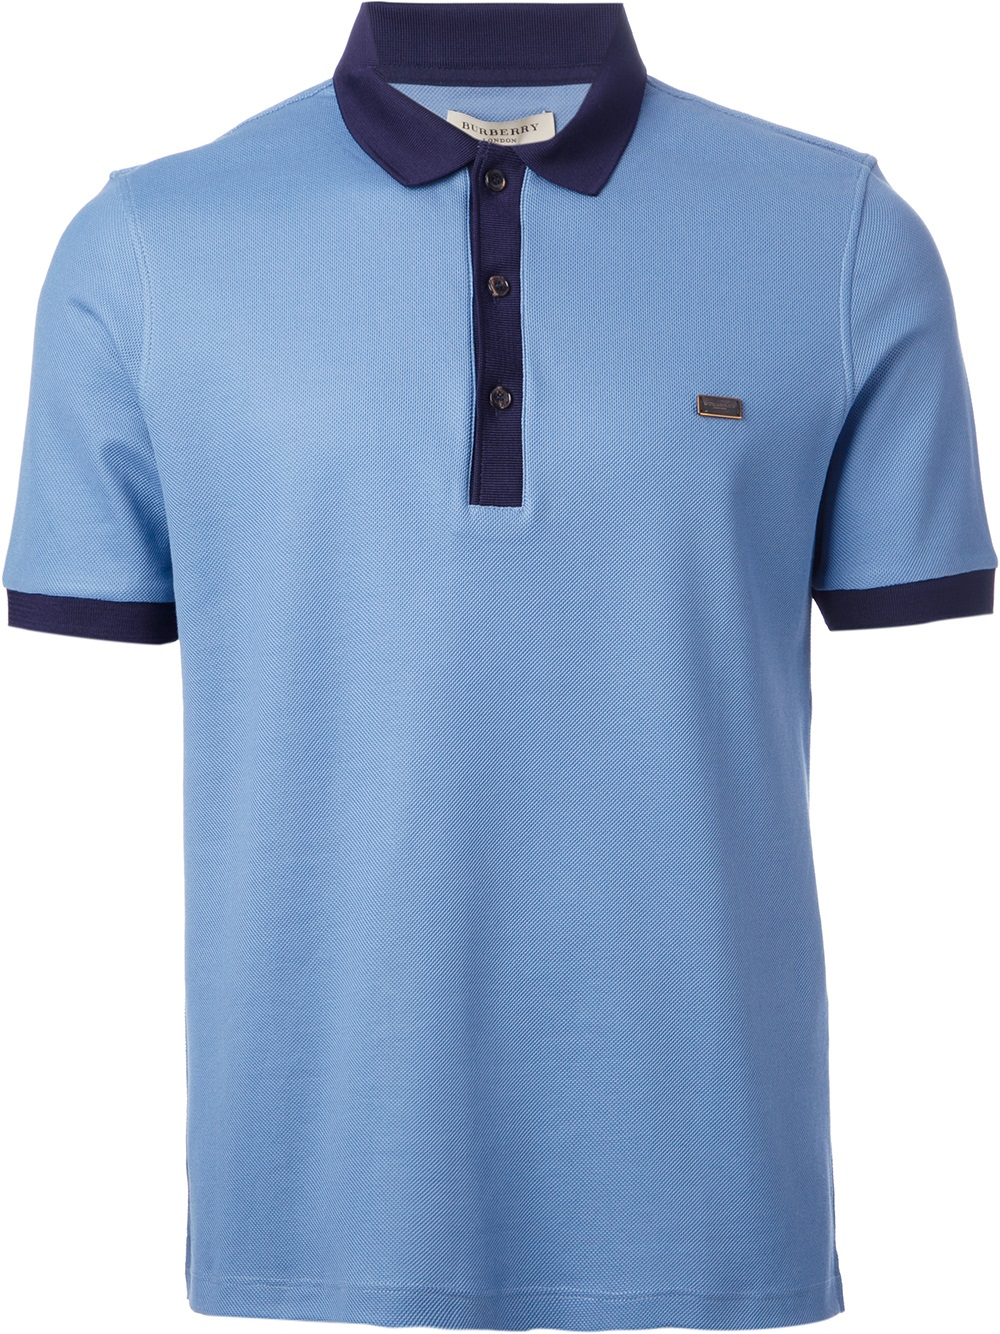 Burberry Contrast Collar Polo Shirt in Blue for Men - Lyst